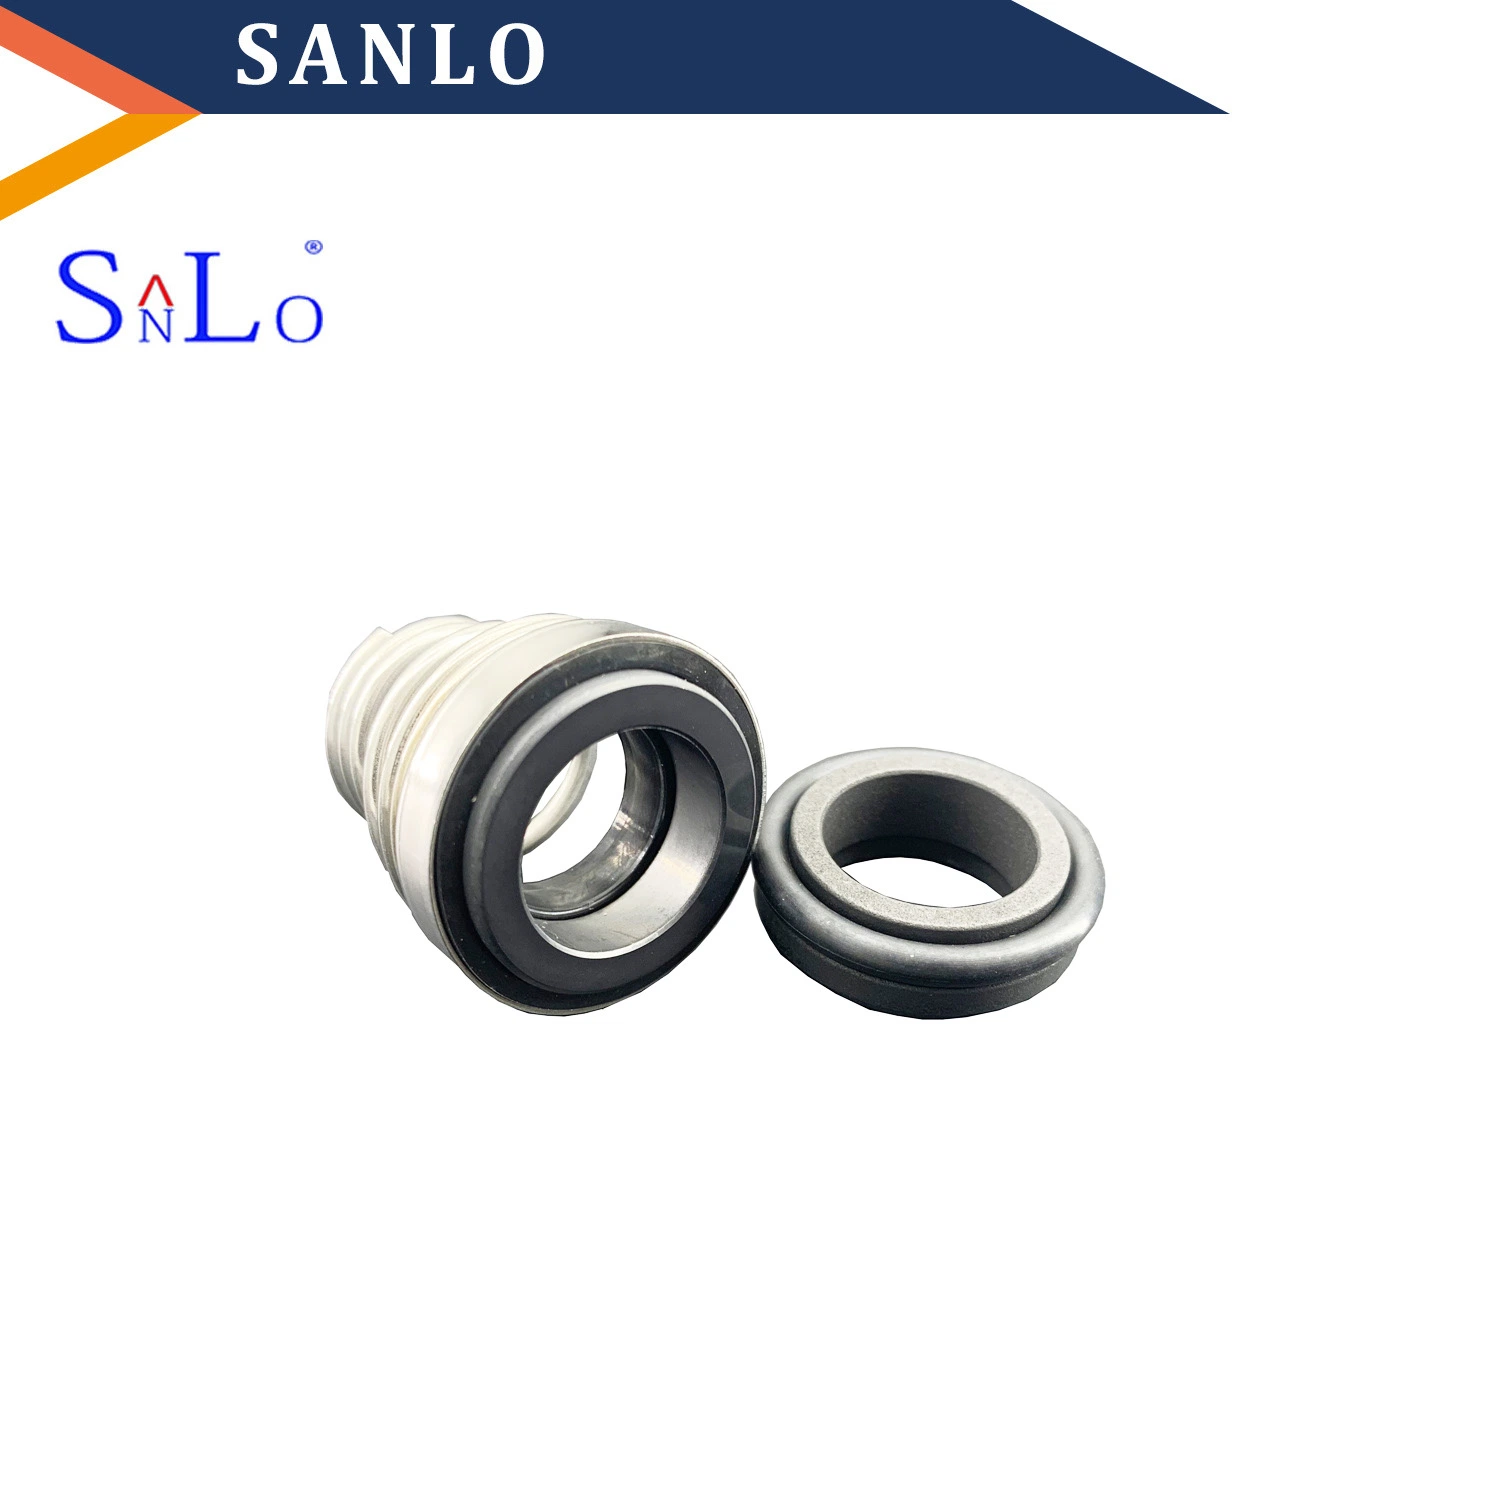 Type 115 Mechanical Seal for Machine Tool Pump